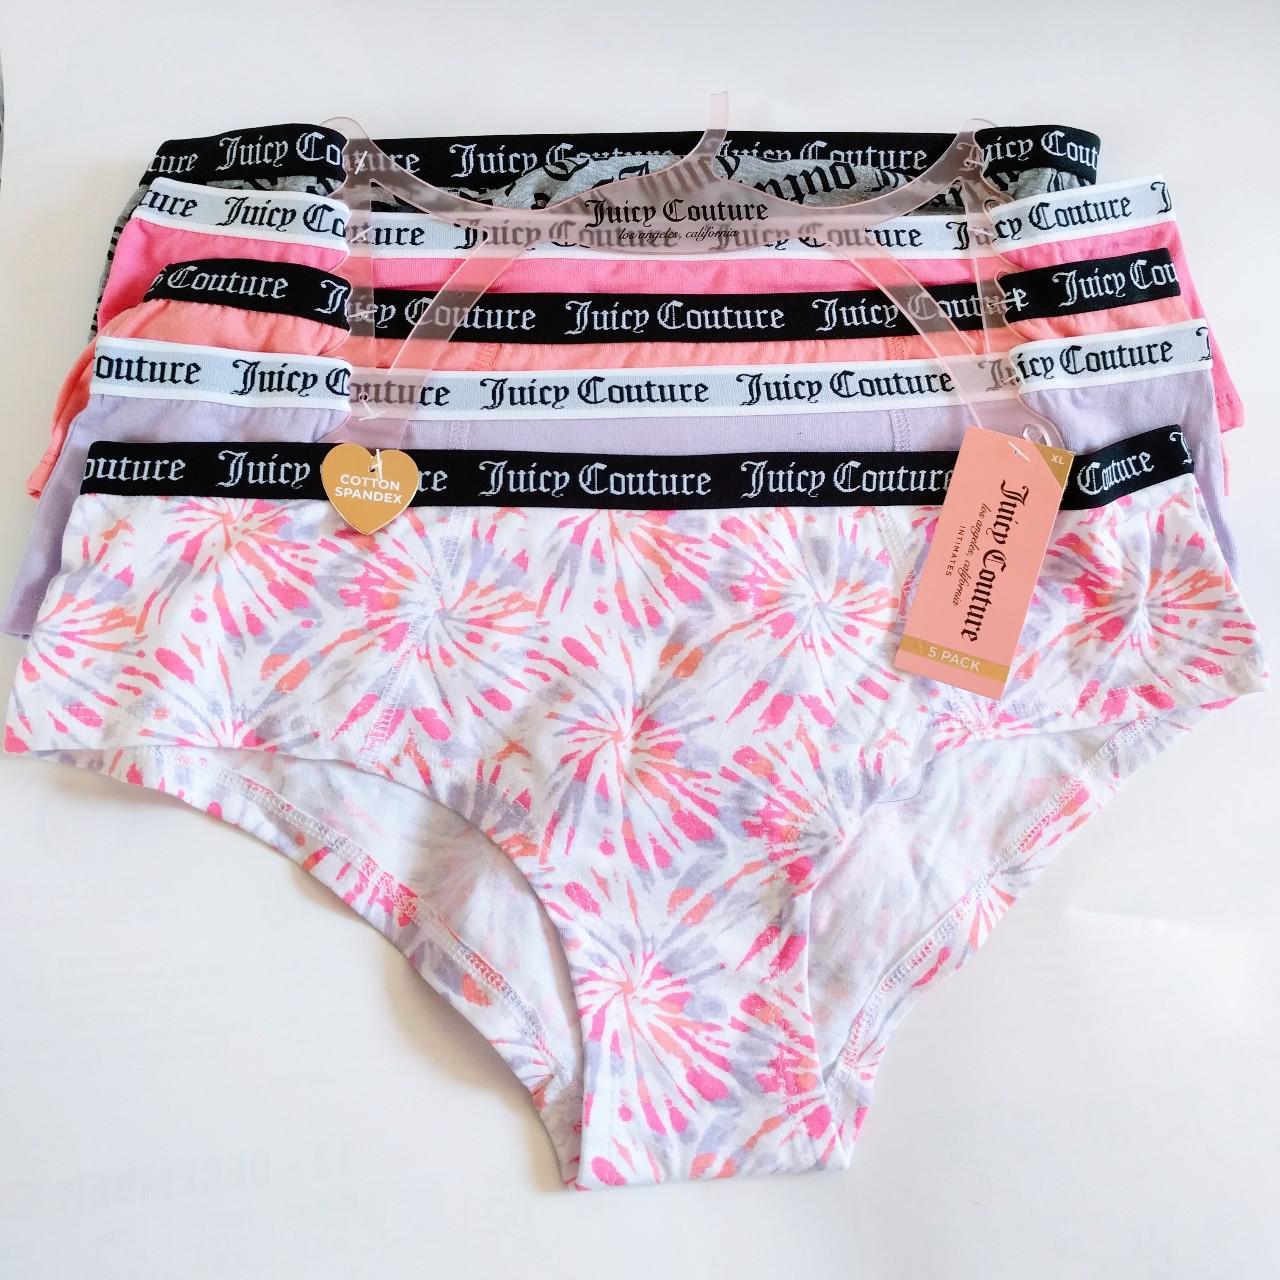 New with tags. Juicy Couture Panties 5 pack. Cotton